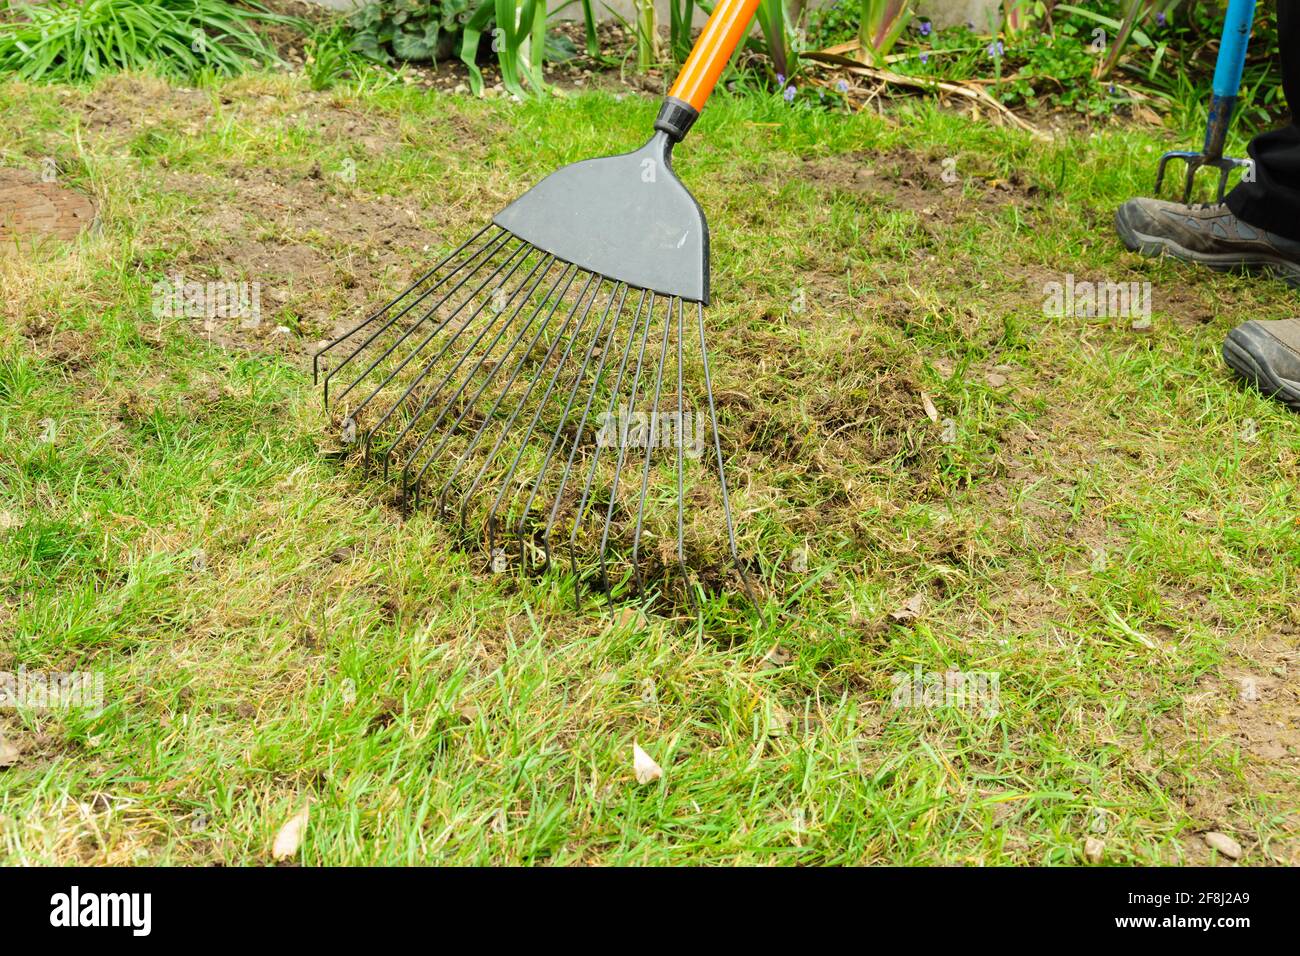 Scarifying or raking a lawn with a wire tooth grass rake to remove dead thatch weeds and moss Stock Photo